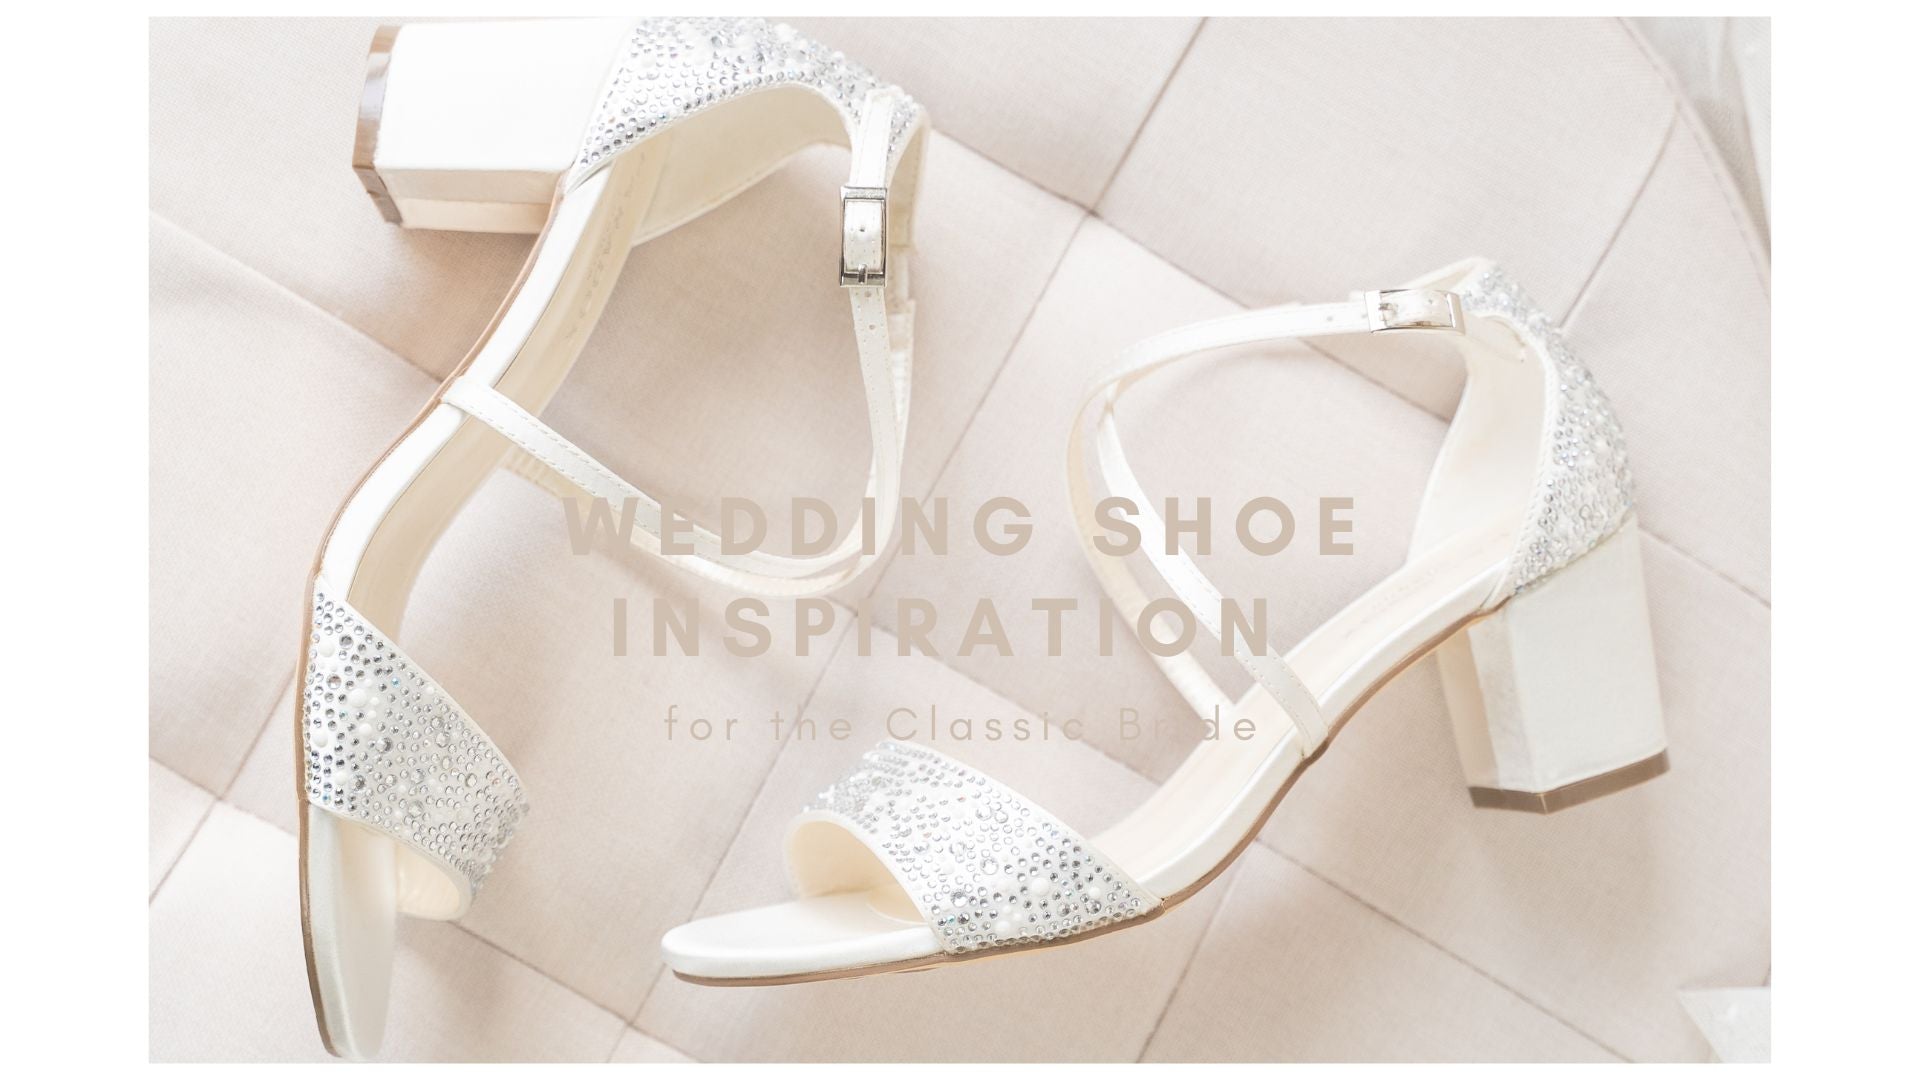 Wedding Shoe Inspiration for the Classic Bride